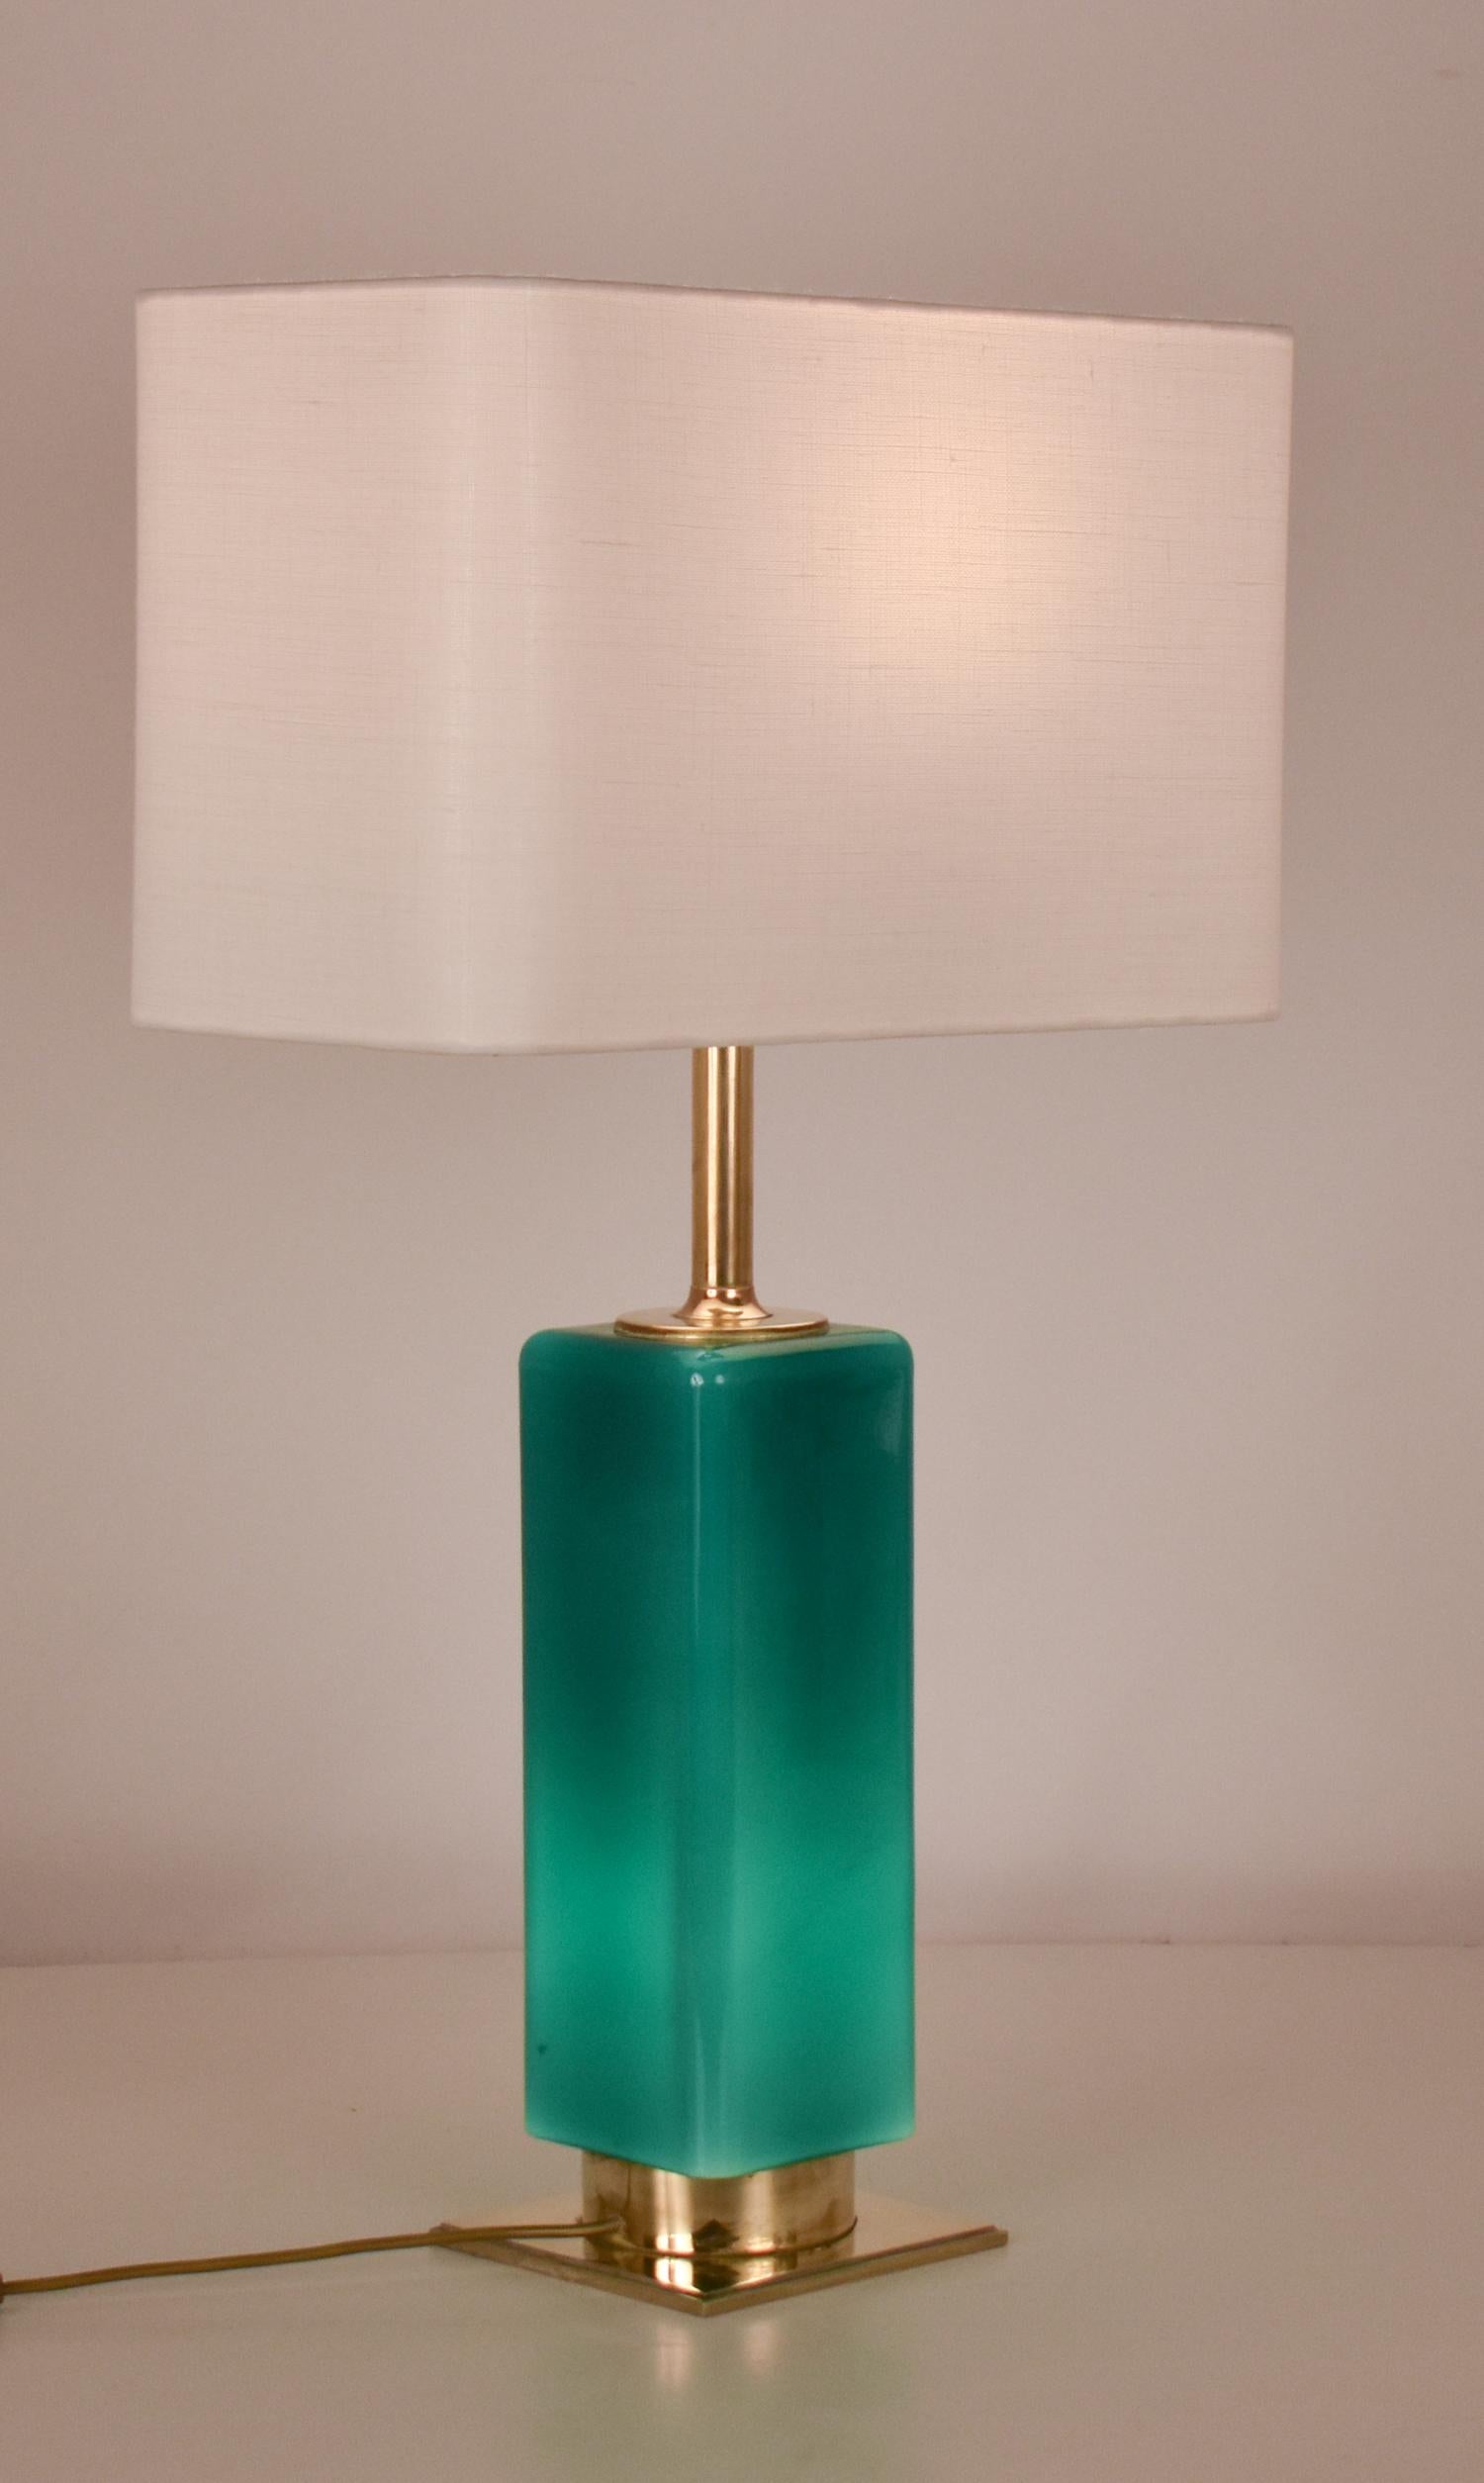 Spanish Mid- Century Large Green Glass and Brass Table Lamp Metalarte, Spain, 1970's For Sale